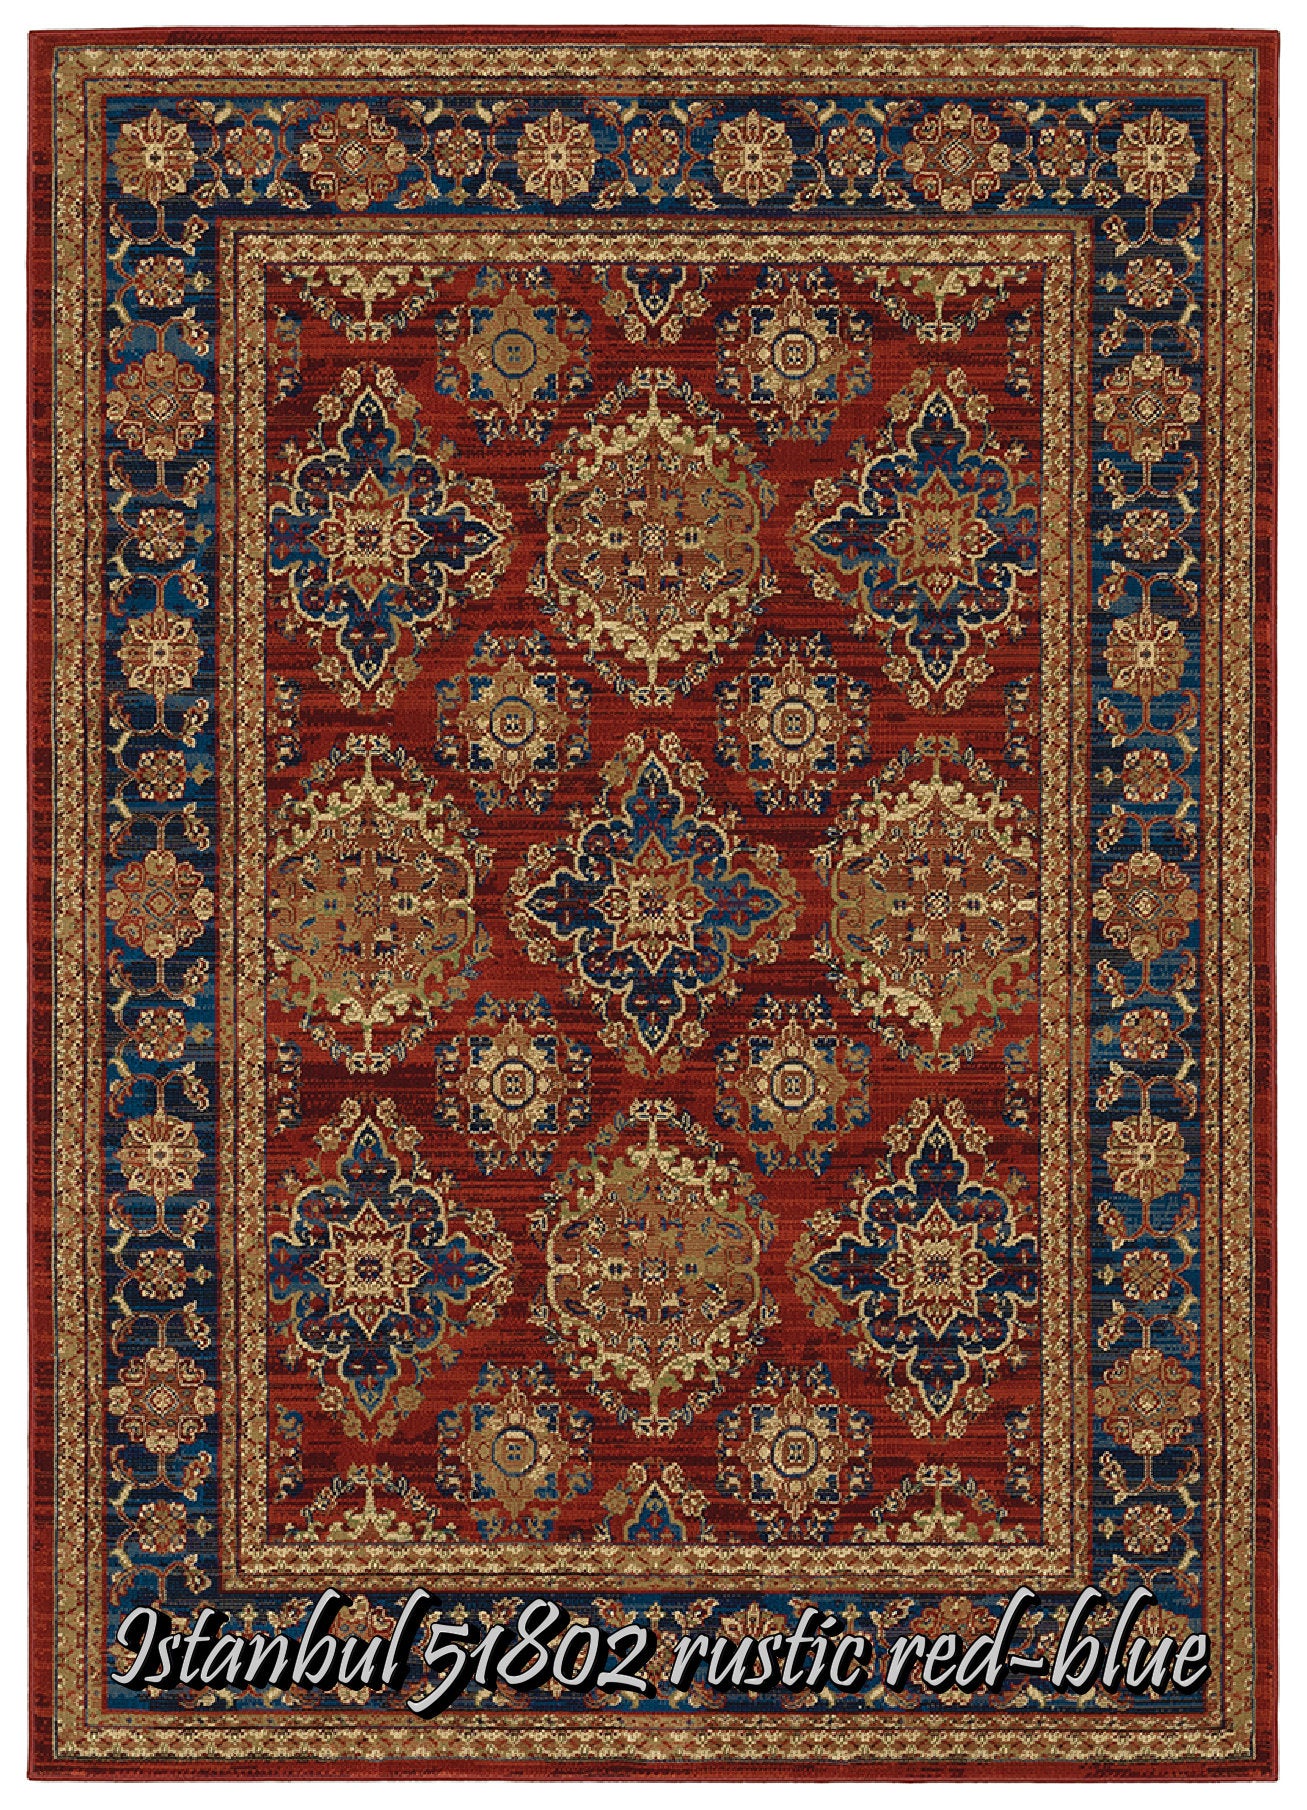 Istanbul 51802 rustic red-blue